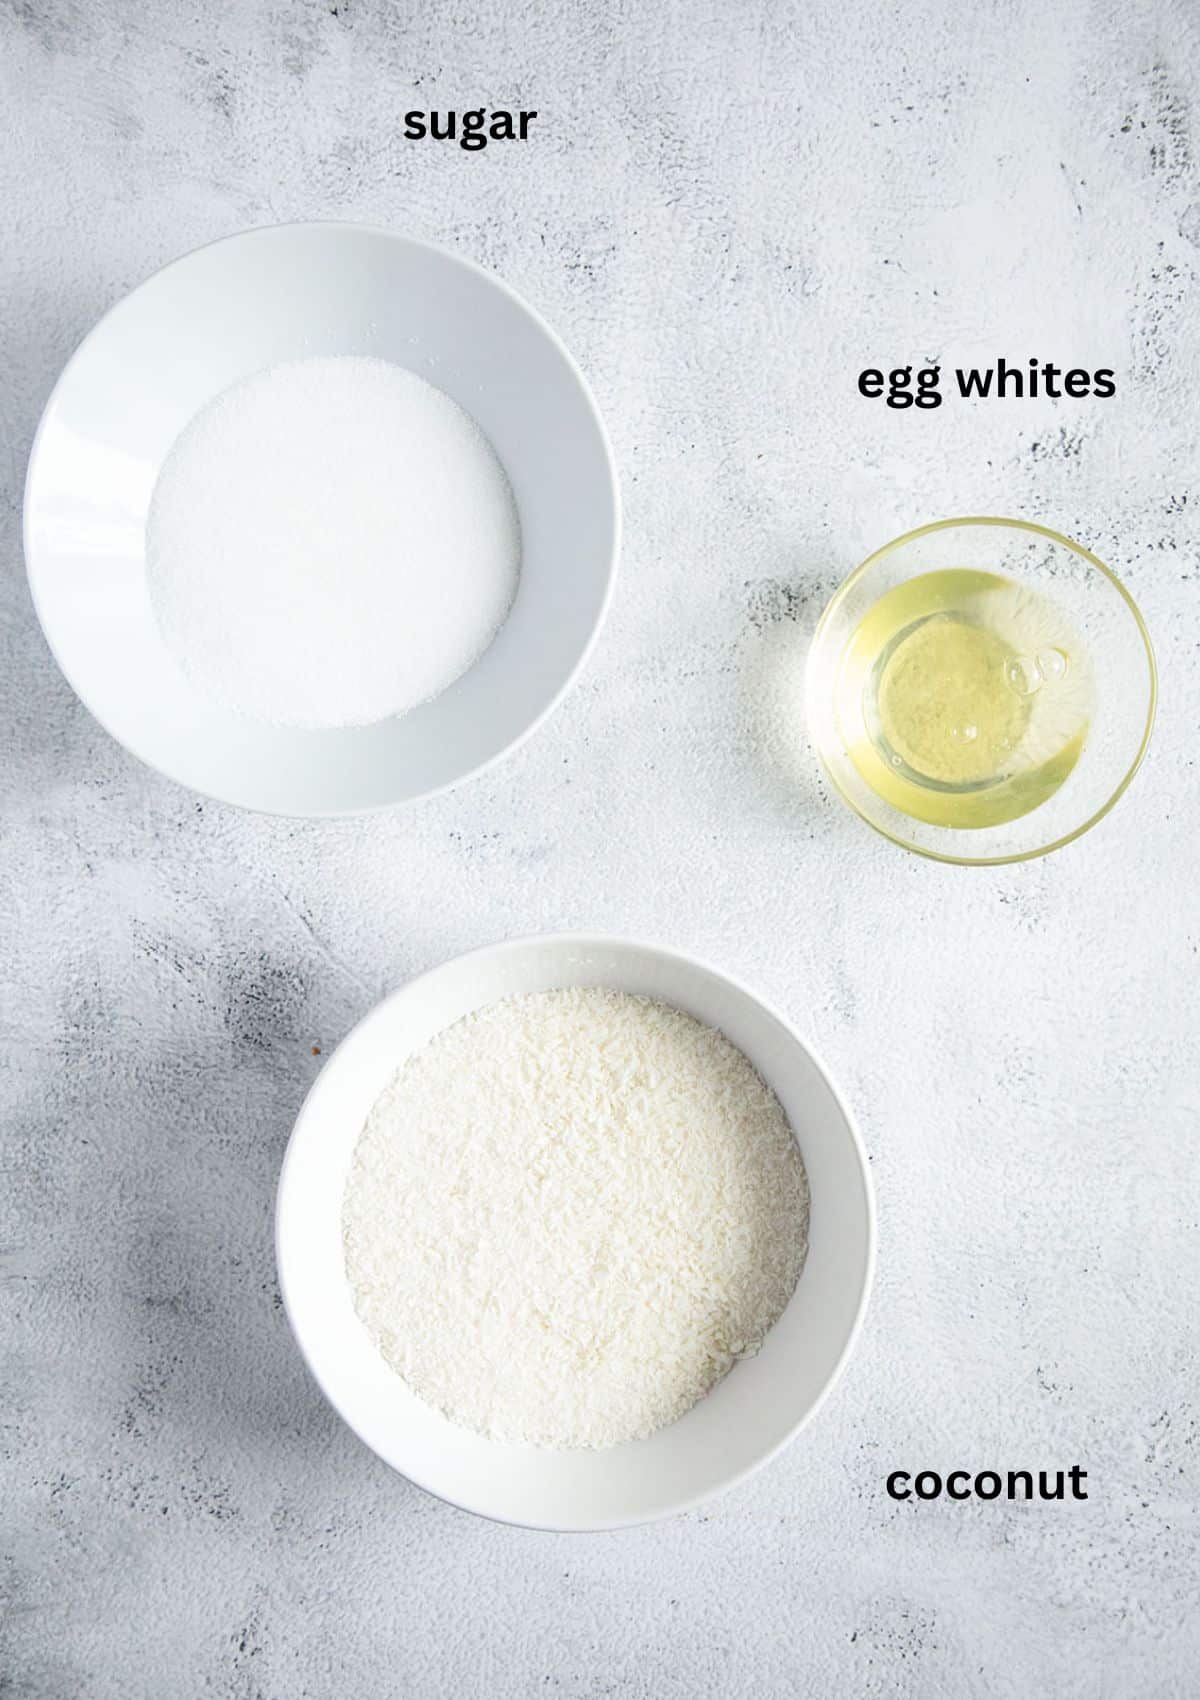 bowls with egg whites, sugar and desiccated coconut for macaroons.